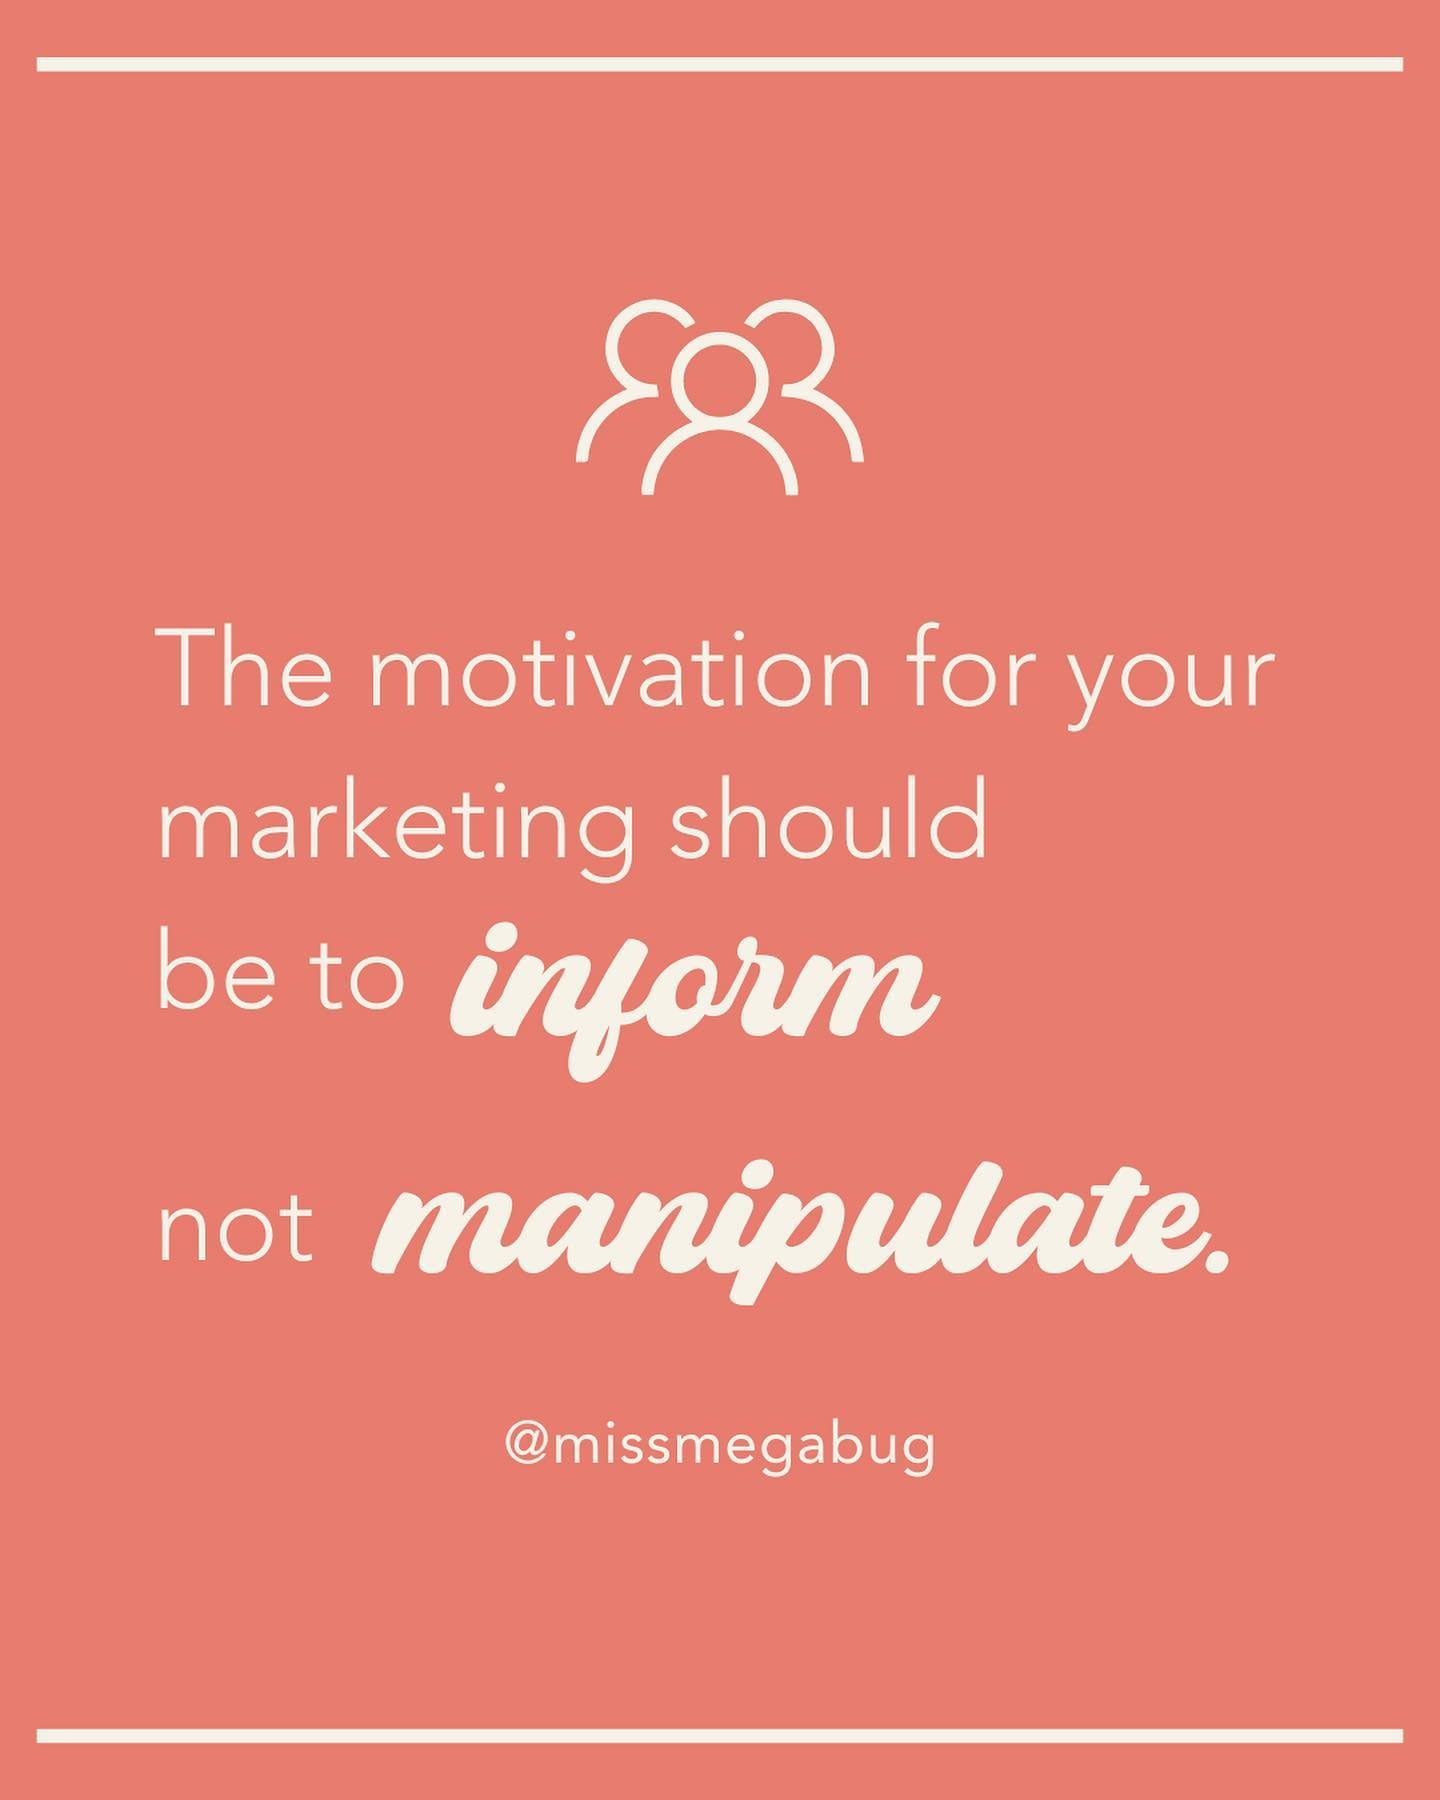 Care to share some manipulative marketing you&rsquo;ve seen? 😬

How do you market authentically in your business? 👇🏼

#marketingtips #smallbusinessmarketing #smallbusinesssupport #smallbusinessmarketingtips